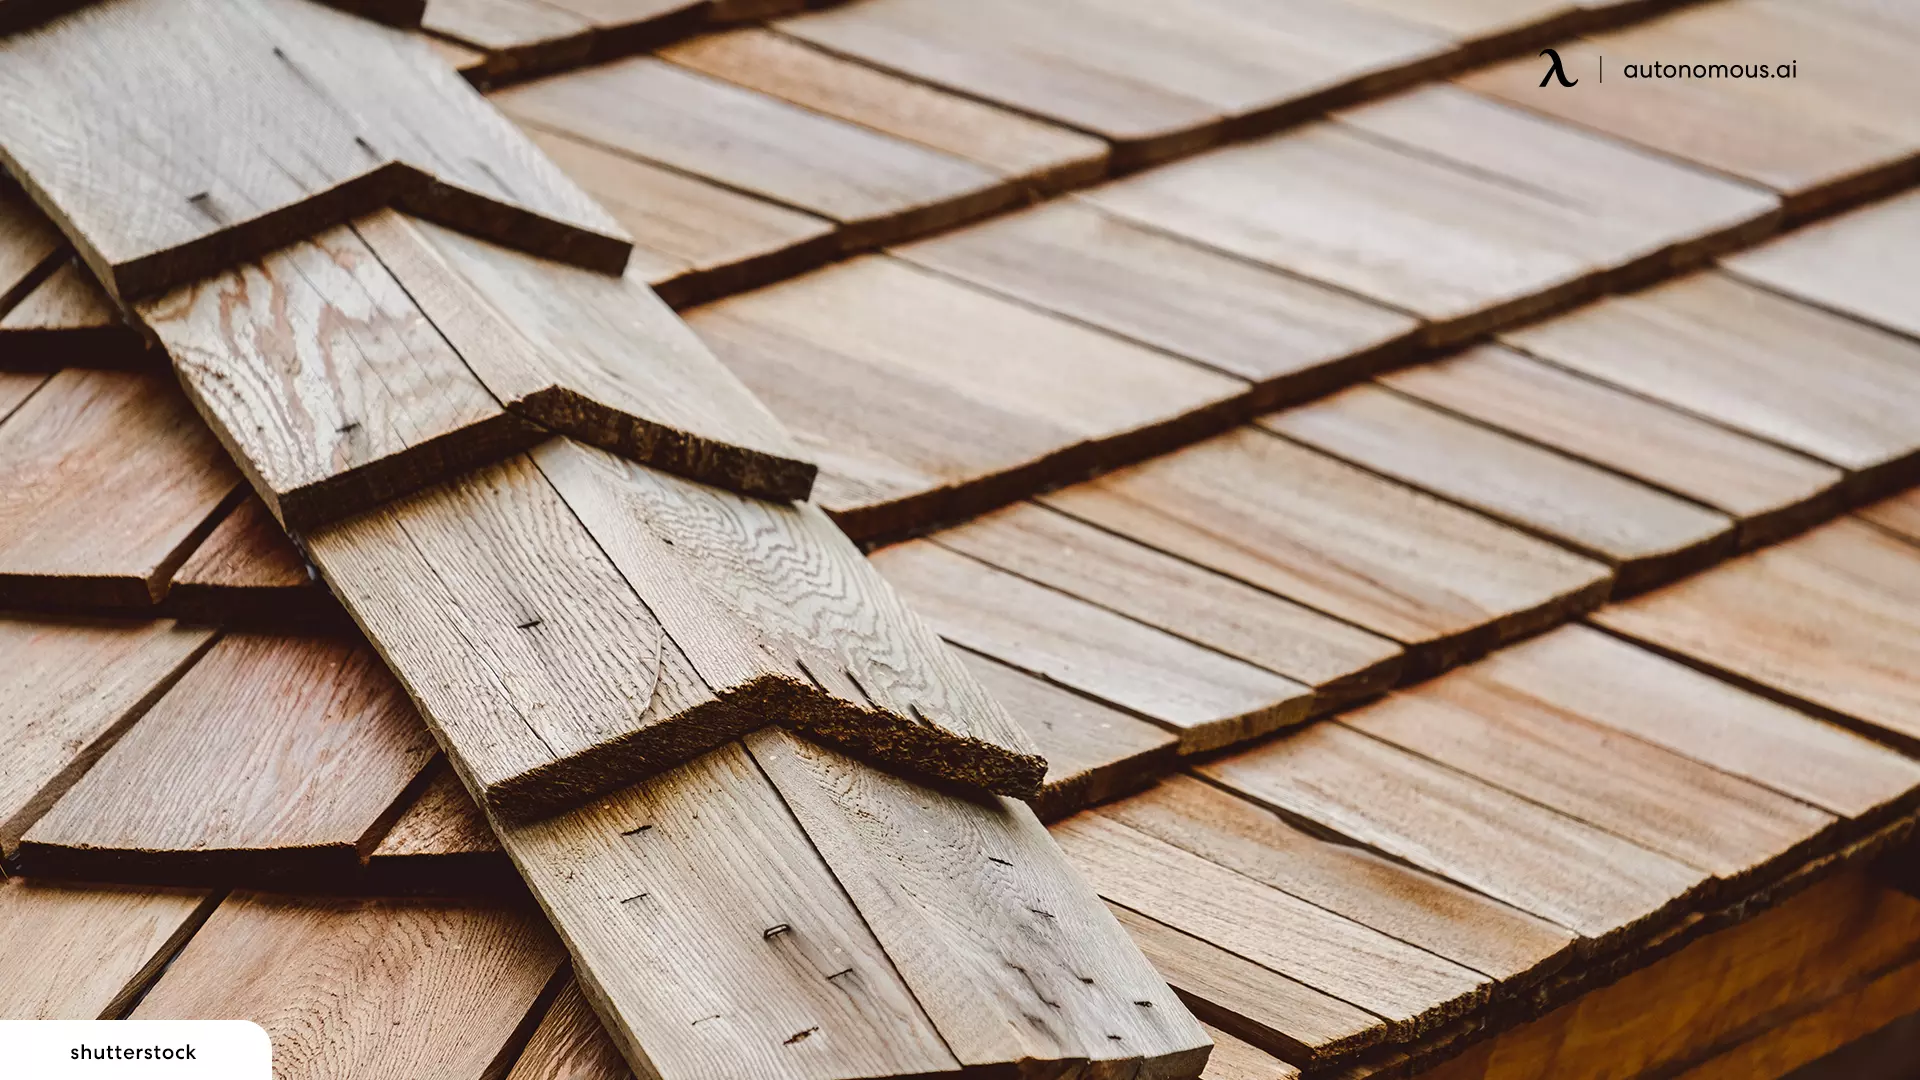 Cedar Shingles - shed roofing material